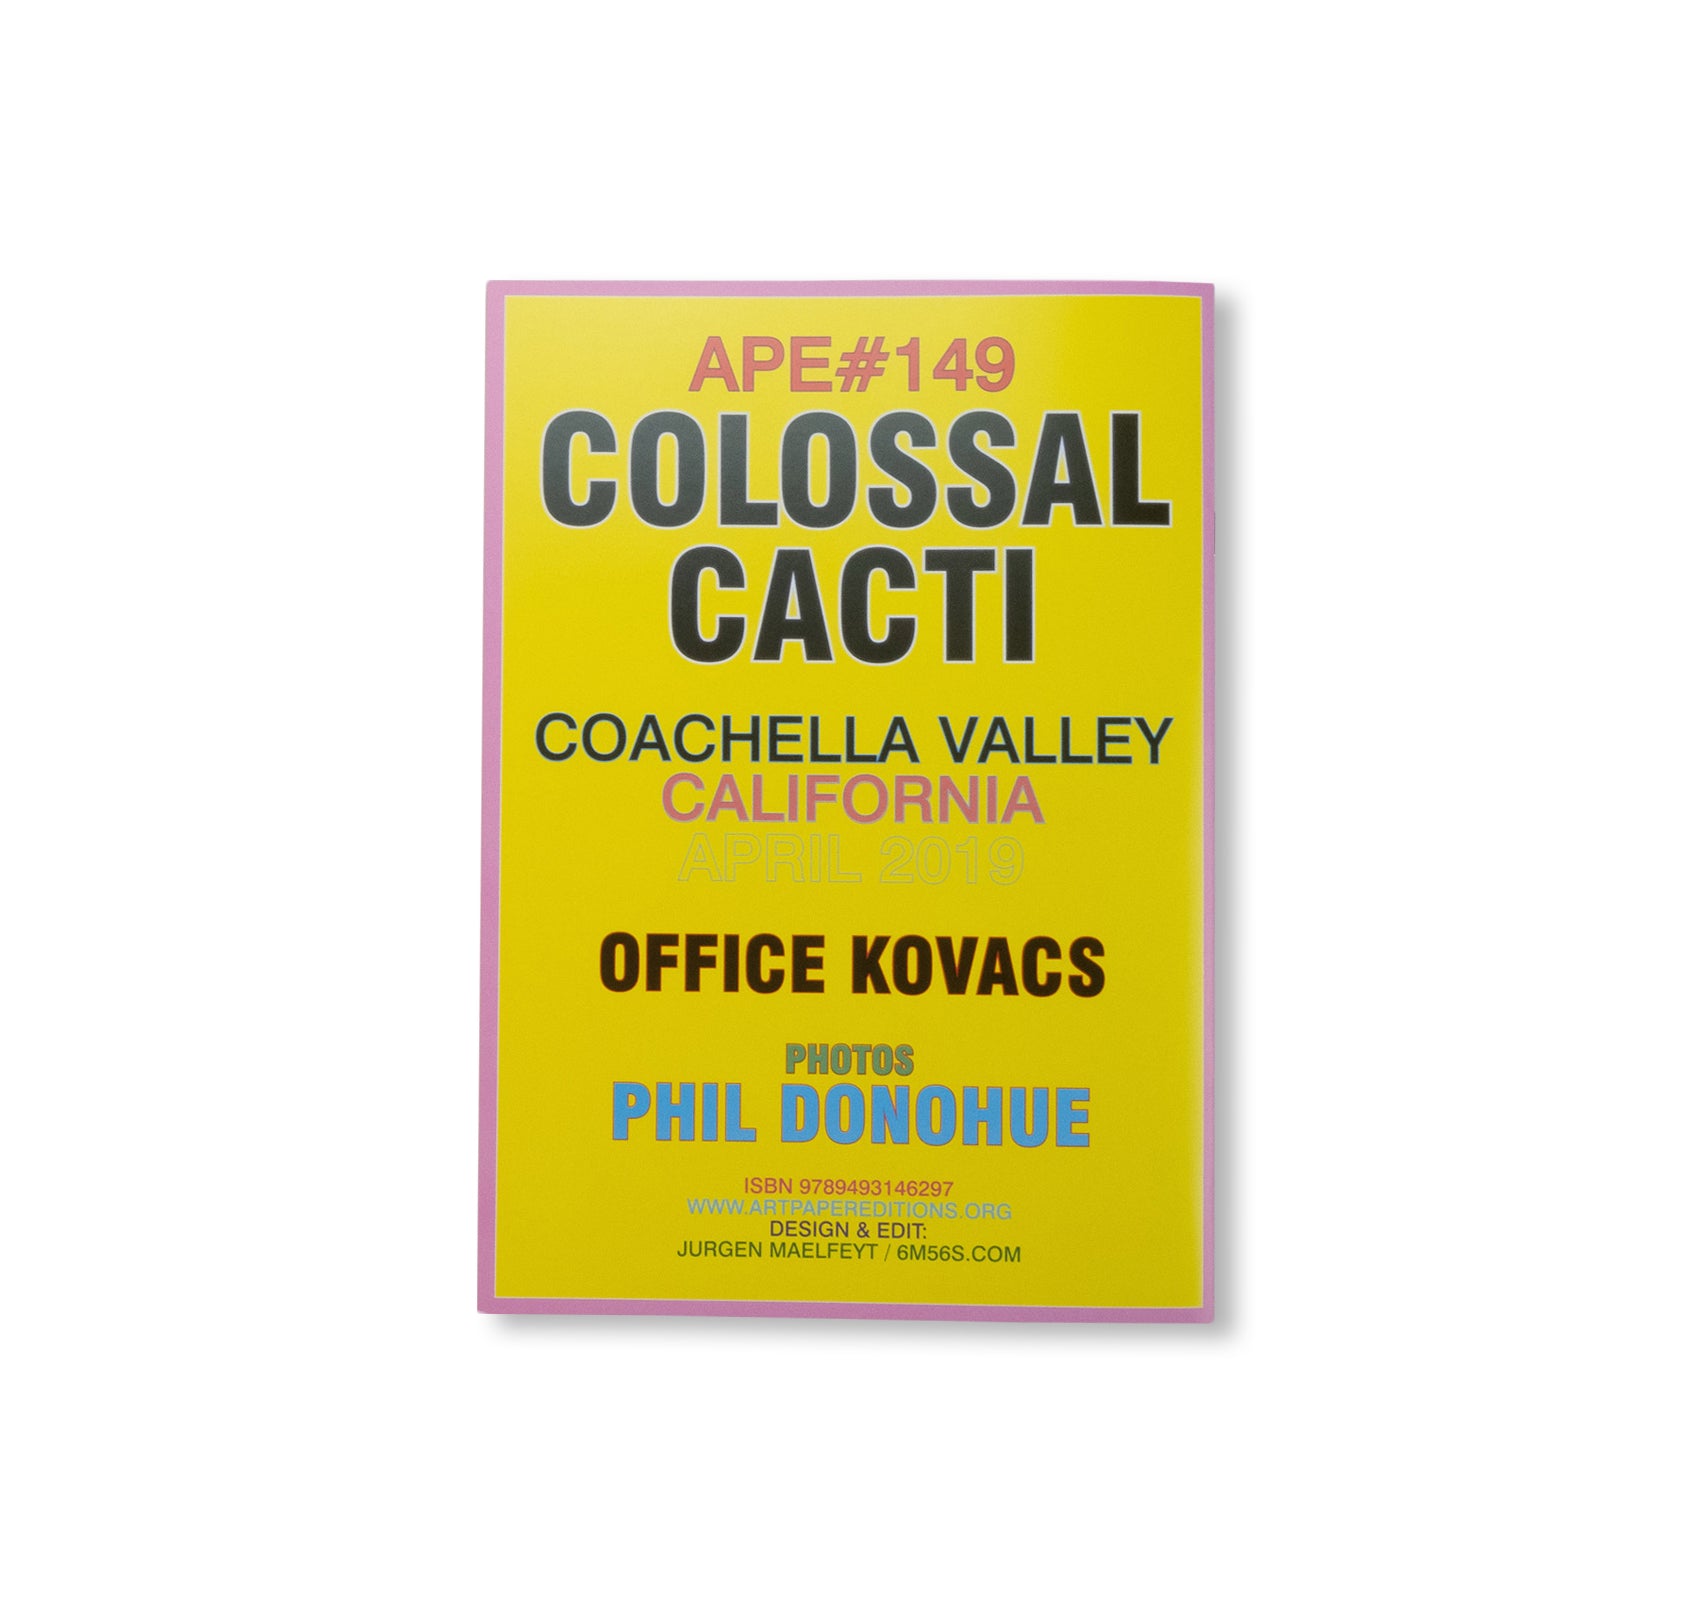 COLOSSAL CACTI by Office Kovacs, Phil Donohue